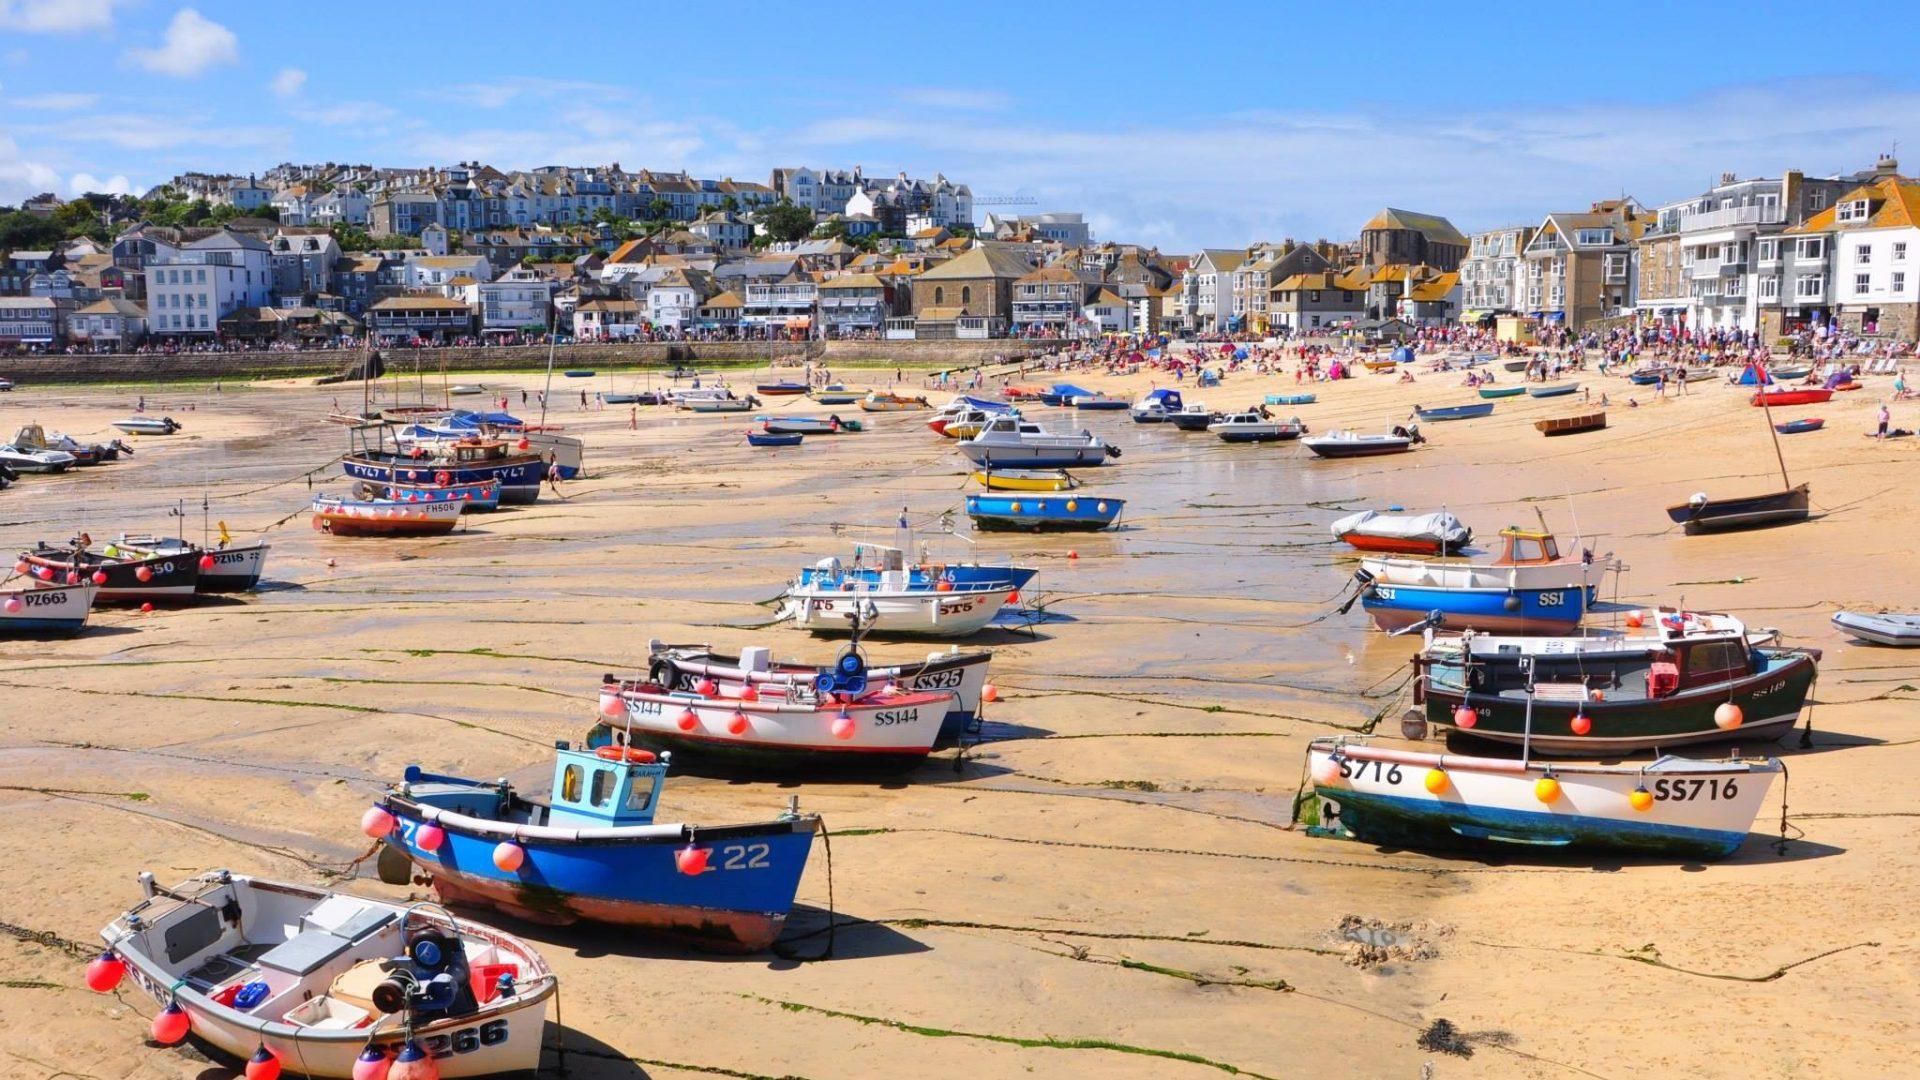 Ives Tag wallpaper: St Ives Cornwall Beach England Wallpaper Best